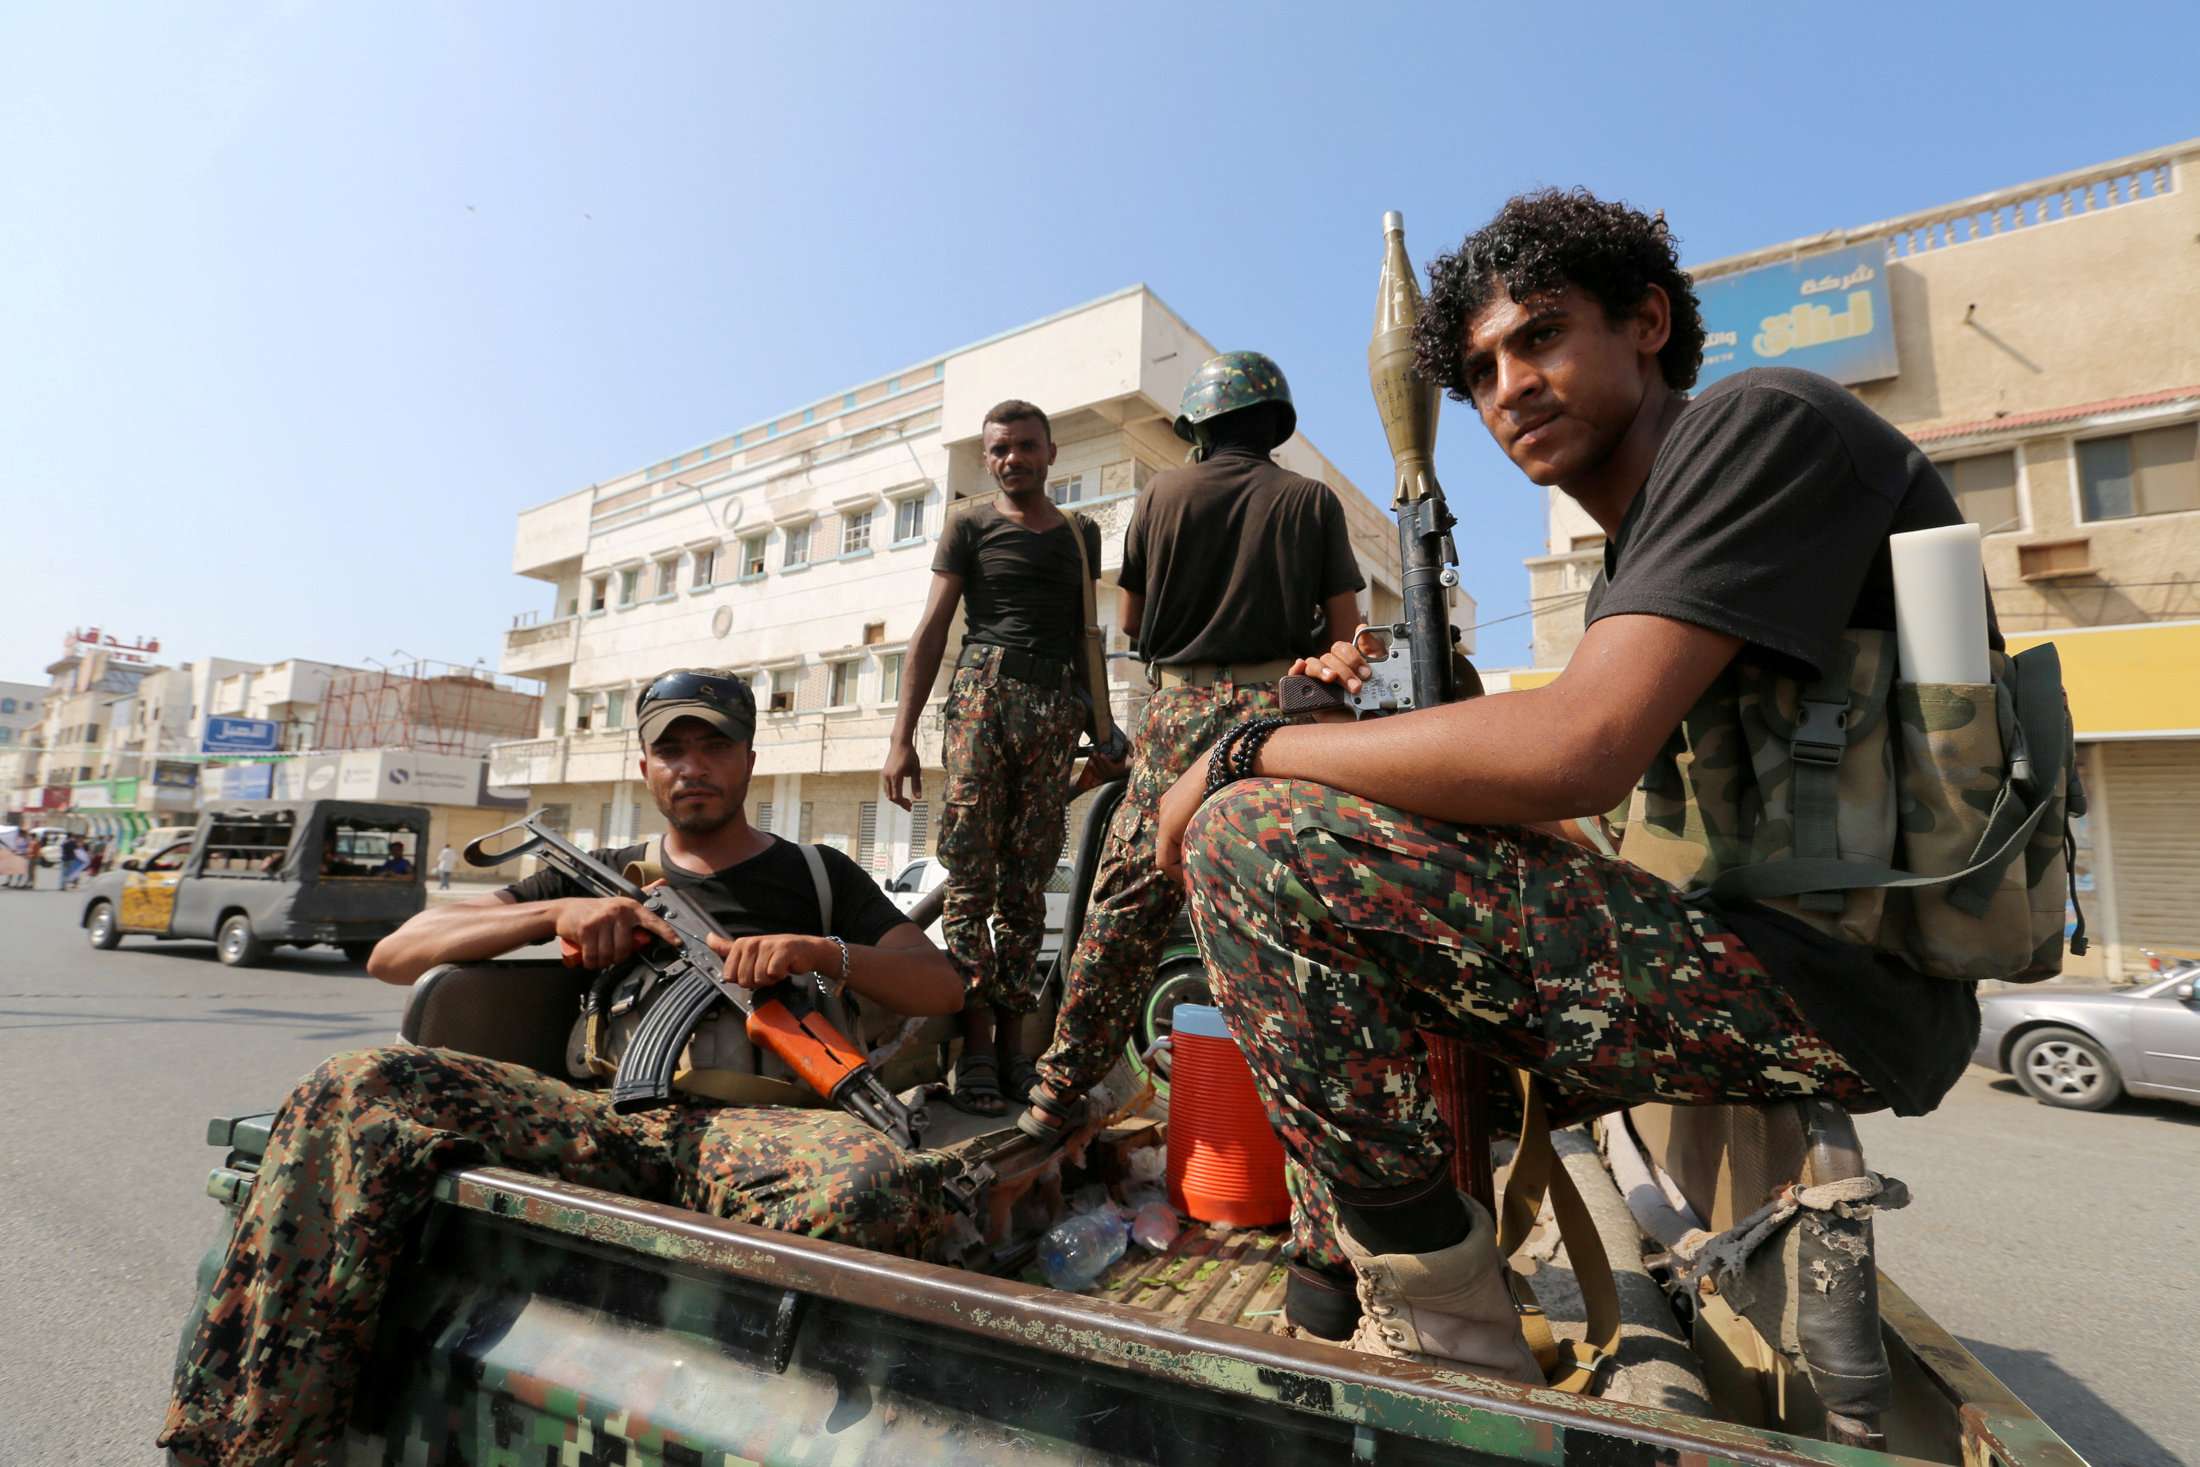 The truce is supposed to be followed by the withdrawal of fighters from Hodeidah within days on both sides.